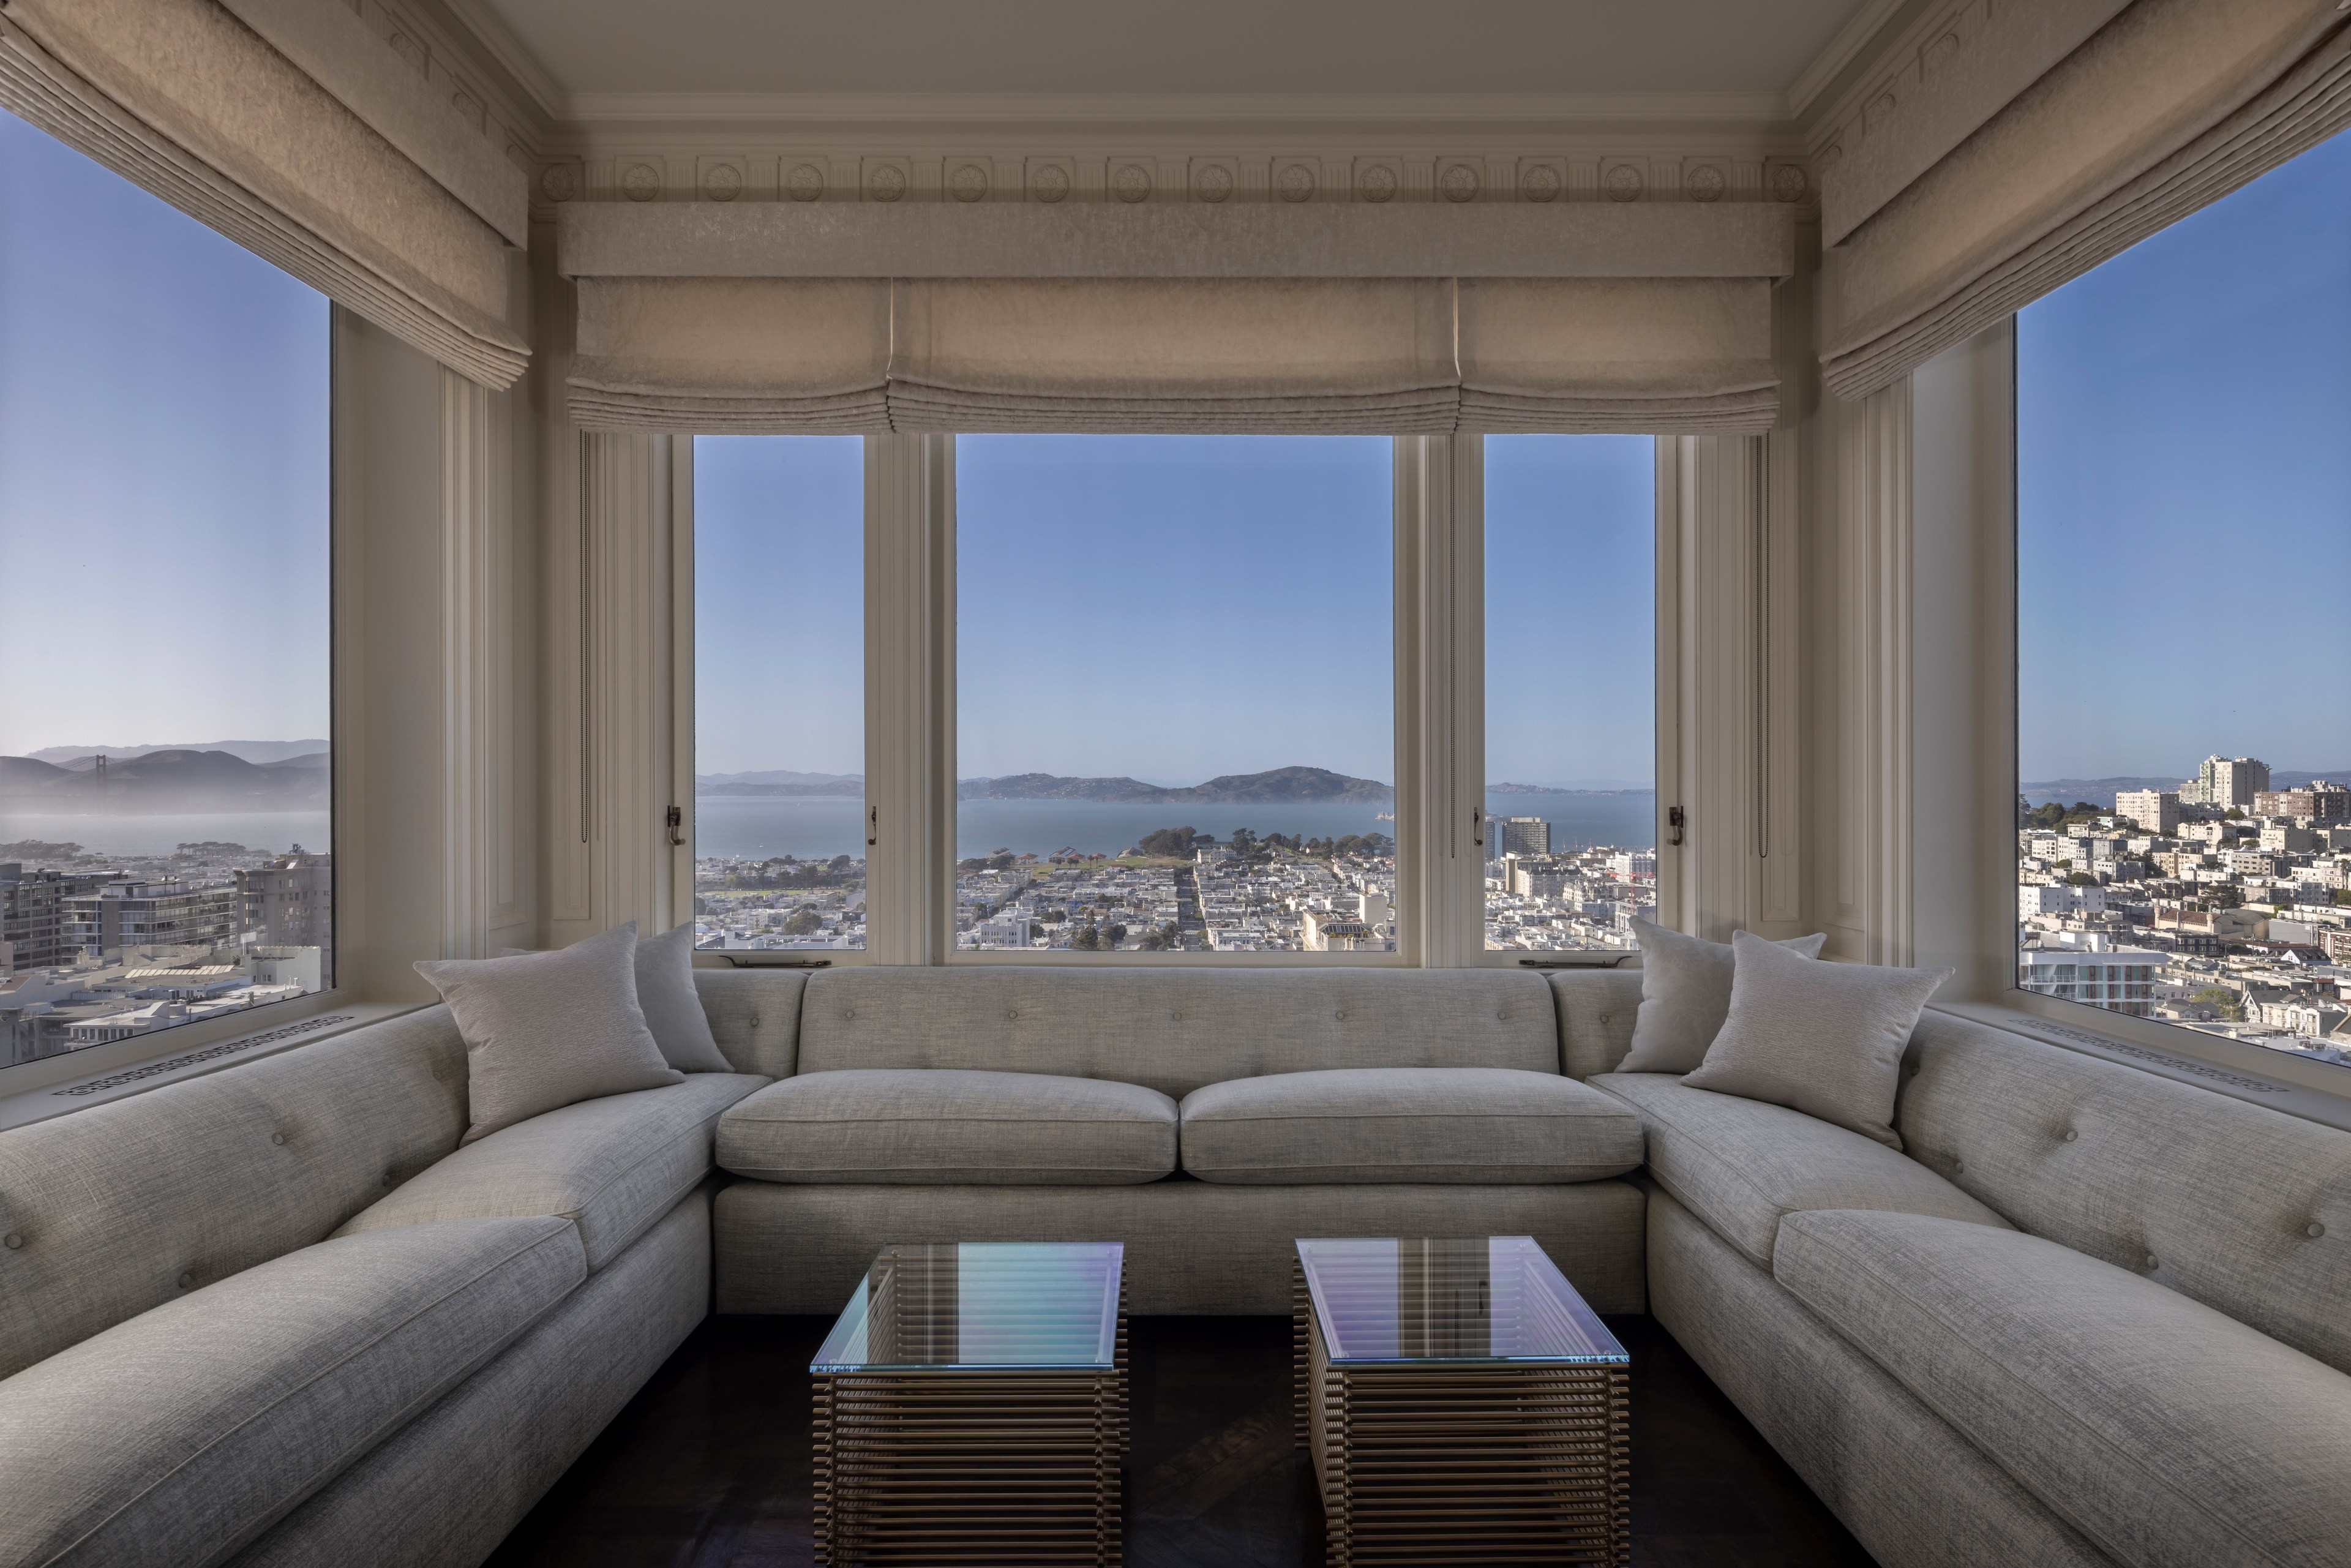 San Francisco's northern skyline is visible from several windows in a nook lined with soft gray couch seating and two small tables.